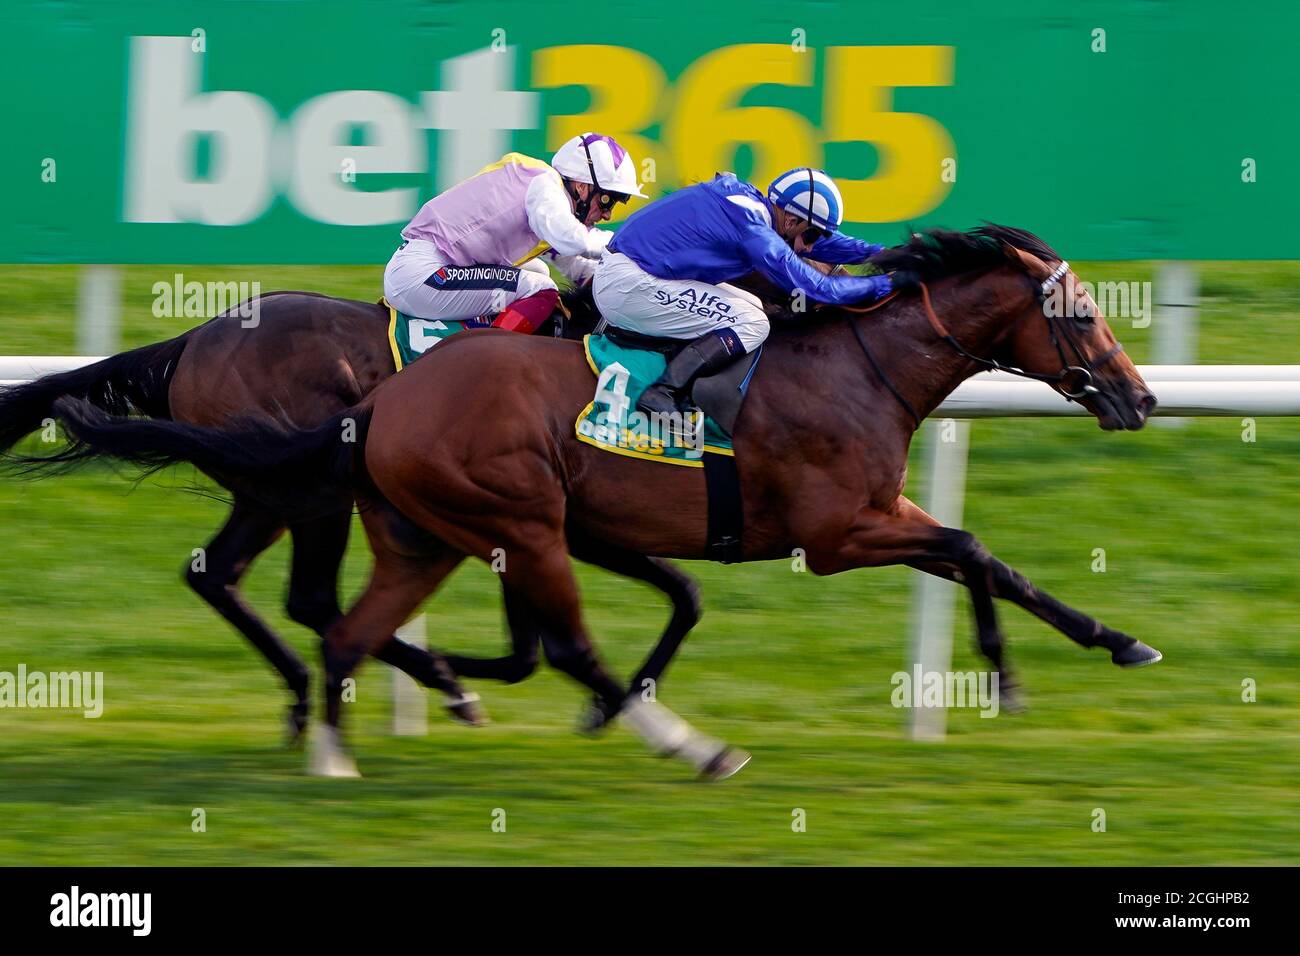 Frankie Dettori riding New Mandate (pink) squeezes up the rails to win The bet365 Flying Scotsman Stakes from Jim Crowley and Laneqash (blue) during day three of the William Hill St Leger Festival at Doncaster Racecourse. Stock Photo